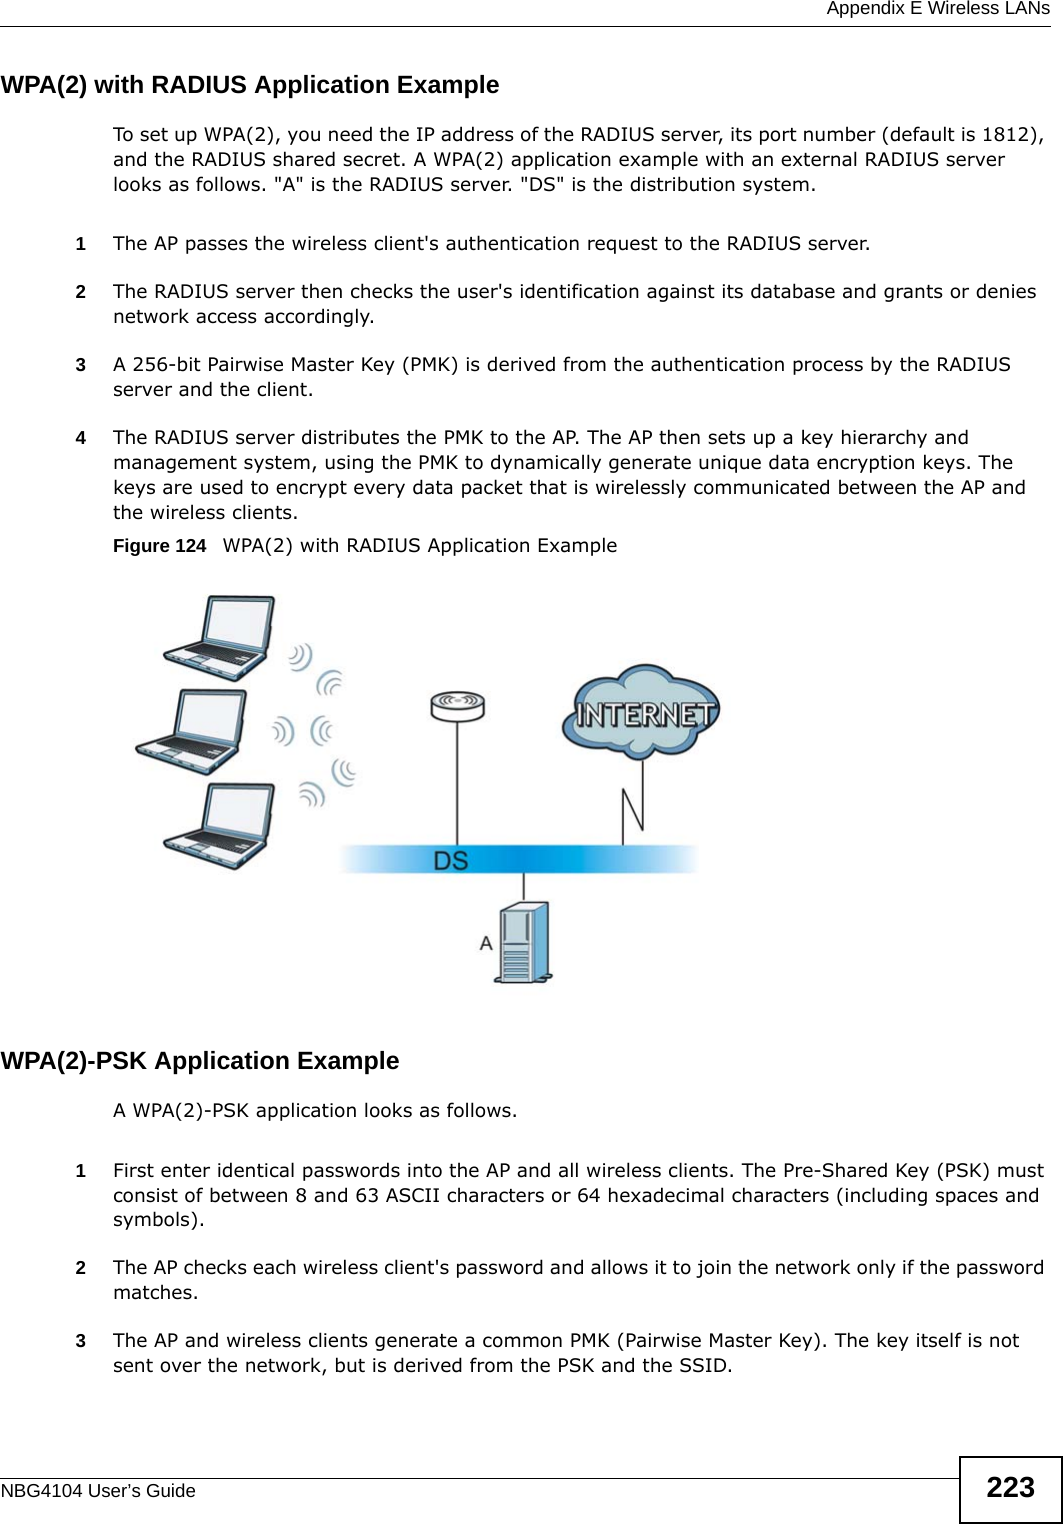  Appendix E Wireless LANsNBG4104 User’s Guide 223WPA(2) with RADIUS Application ExampleTo set up WPA(2), you need the IP address of the RADIUS server, its port number (default is 1812), and the RADIUS shared secret. A WPA(2) application example with an external RADIUS server looks as follows. &quot;A&quot; is the RADIUS server. &quot;DS&quot; is the distribution system.1The AP passes the wireless client&apos;s authentication request to the RADIUS server.2The RADIUS server then checks the user&apos;s identification against its database and grants or denies network access accordingly.3A 256-bit Pairwise Master Key (PMK) is derived from the authentication process by the RADIUS server and the client.4The RADIUS server distributes the PMK to the AP. The AP then sets up a key hierarchy and management system, using the PMK to dynamically generate unique data encryption keys. The keys are used to encrypt every data packet that is wirelessly communicated between the AP and the wireless clients.Figure 124   WPA(2) with RADIUS Application ExampleWPA(2)-PSK Application ExampleA WPA(2)-PSK application looks as follows.1First enter identical passwords into the AP and all wireless clients. The Pre-Shared Key (PSK) must consist of between 8 and 63 ASCII characters or 64 hexadecimal characters (including spaces and symbols).2The AP checks each wireless client&apos;s password and allows it to join the network only if the password matches.3The AP and wireless clients generate a common PMK (Pairwise Master Key). The key itself is not sent over the network, but is derived from the PSK and the SSID. 